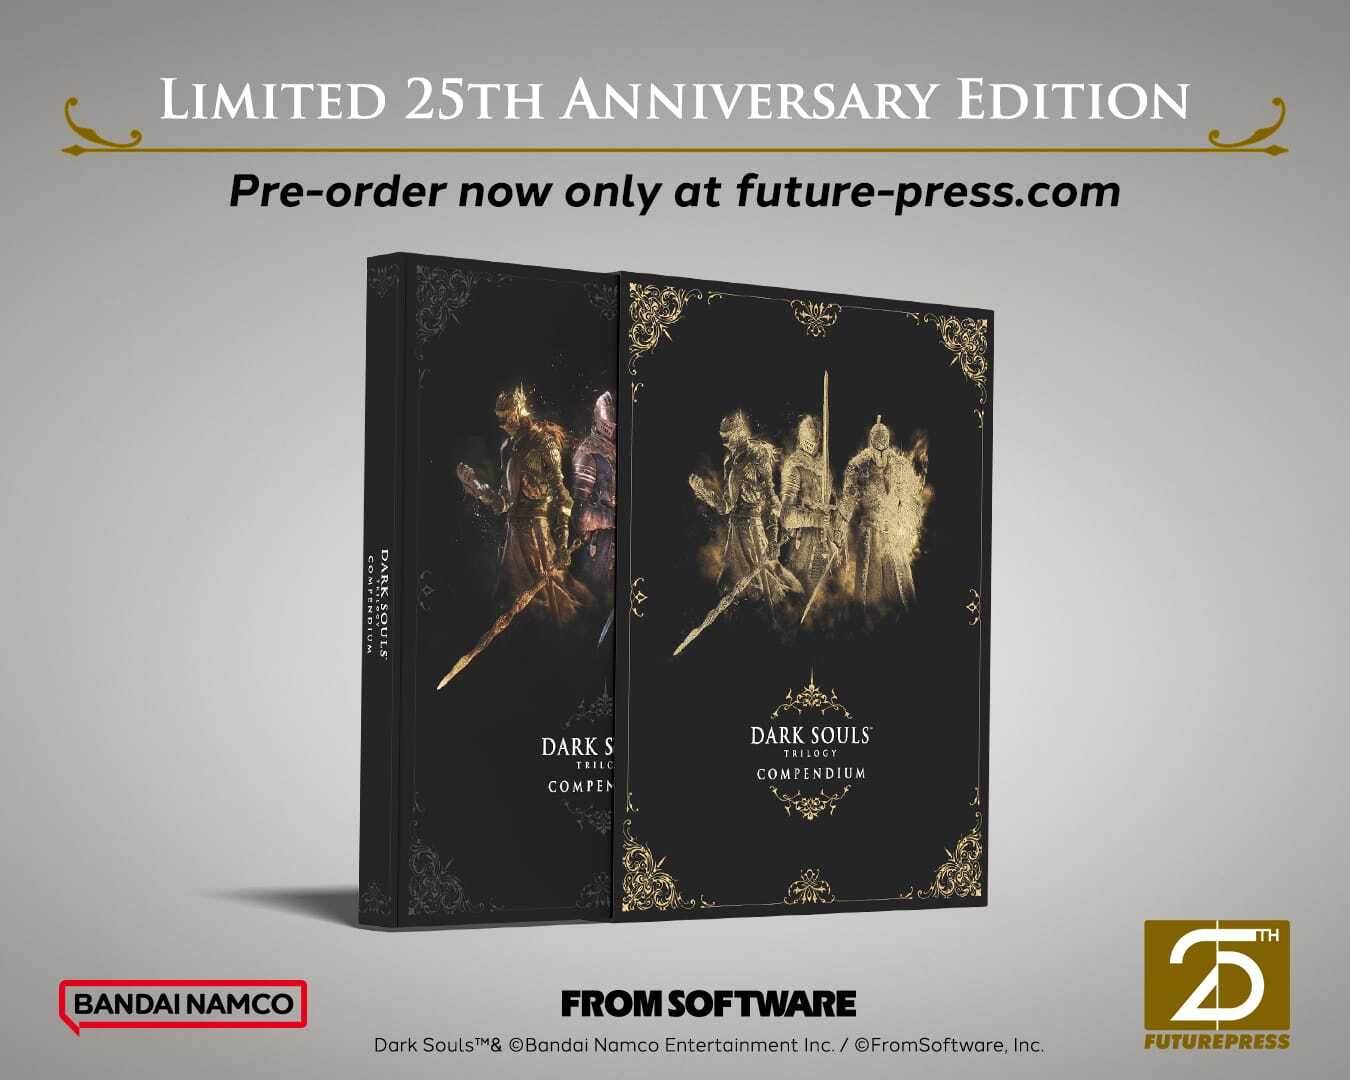 Future Press on X: The Dark Souls Trilogy Compendium is back! A